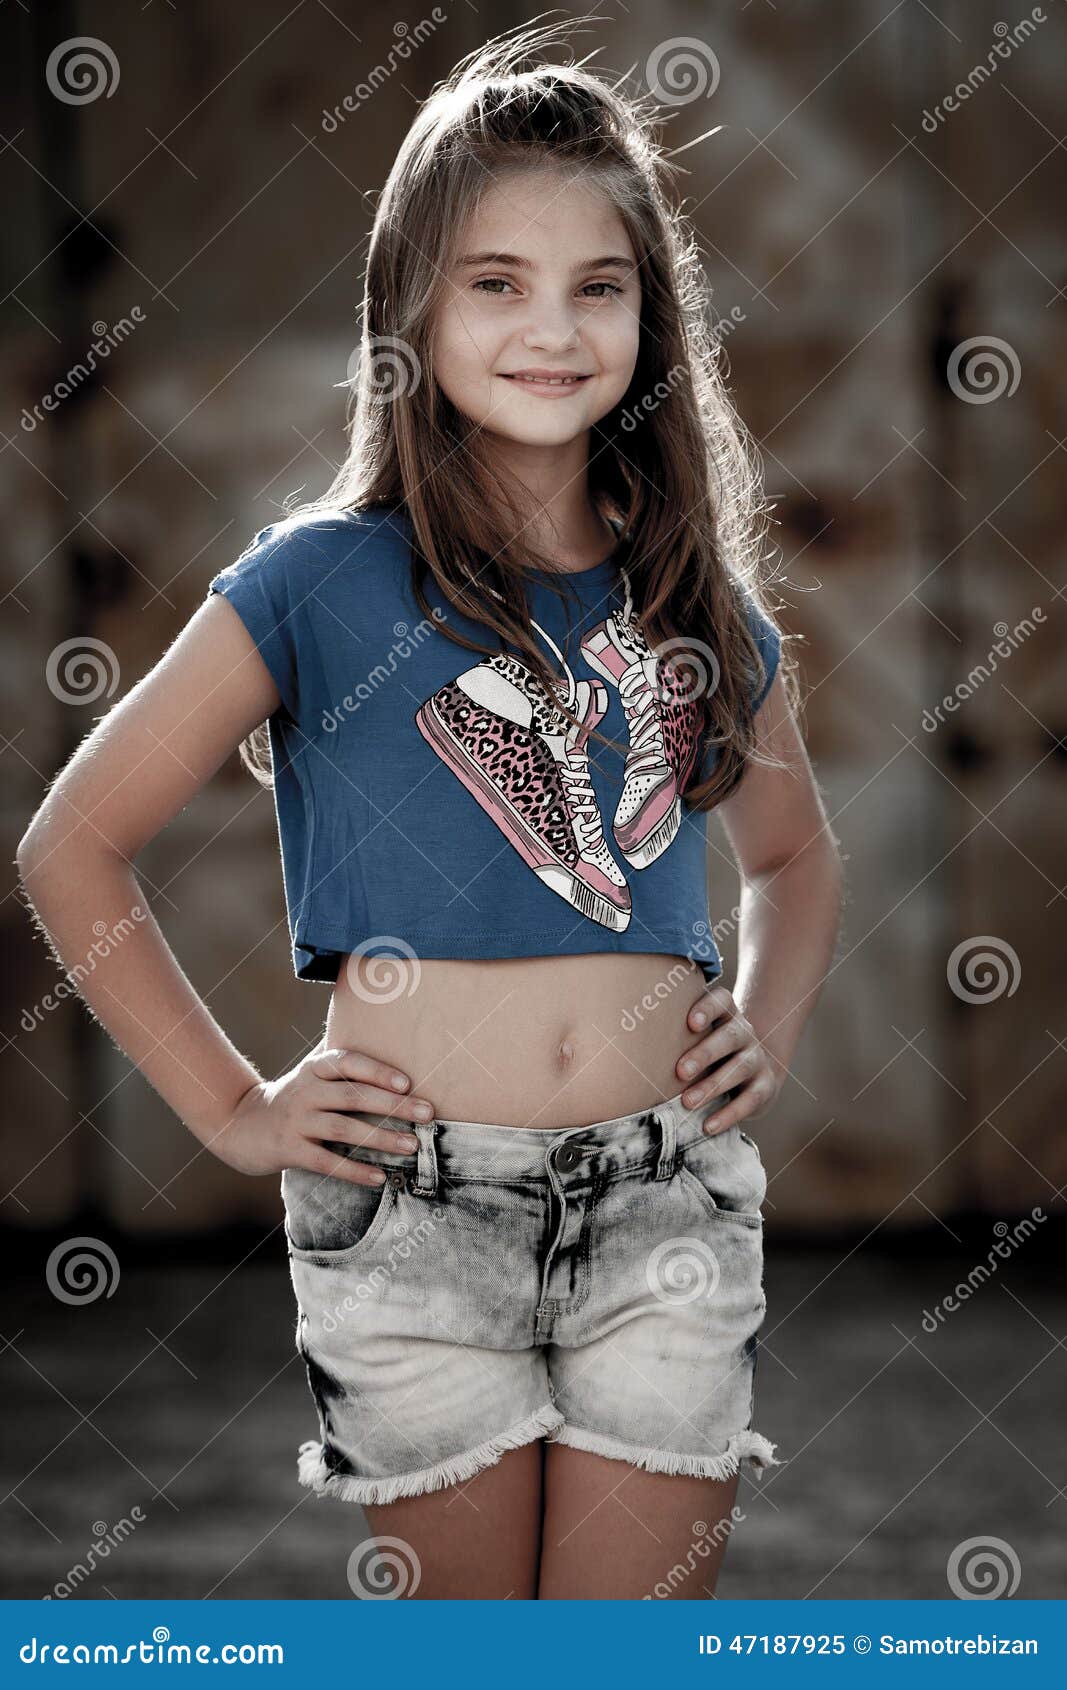 Young Cute Girl on a Street Stock Image - Image of beauty, streets: 47187925